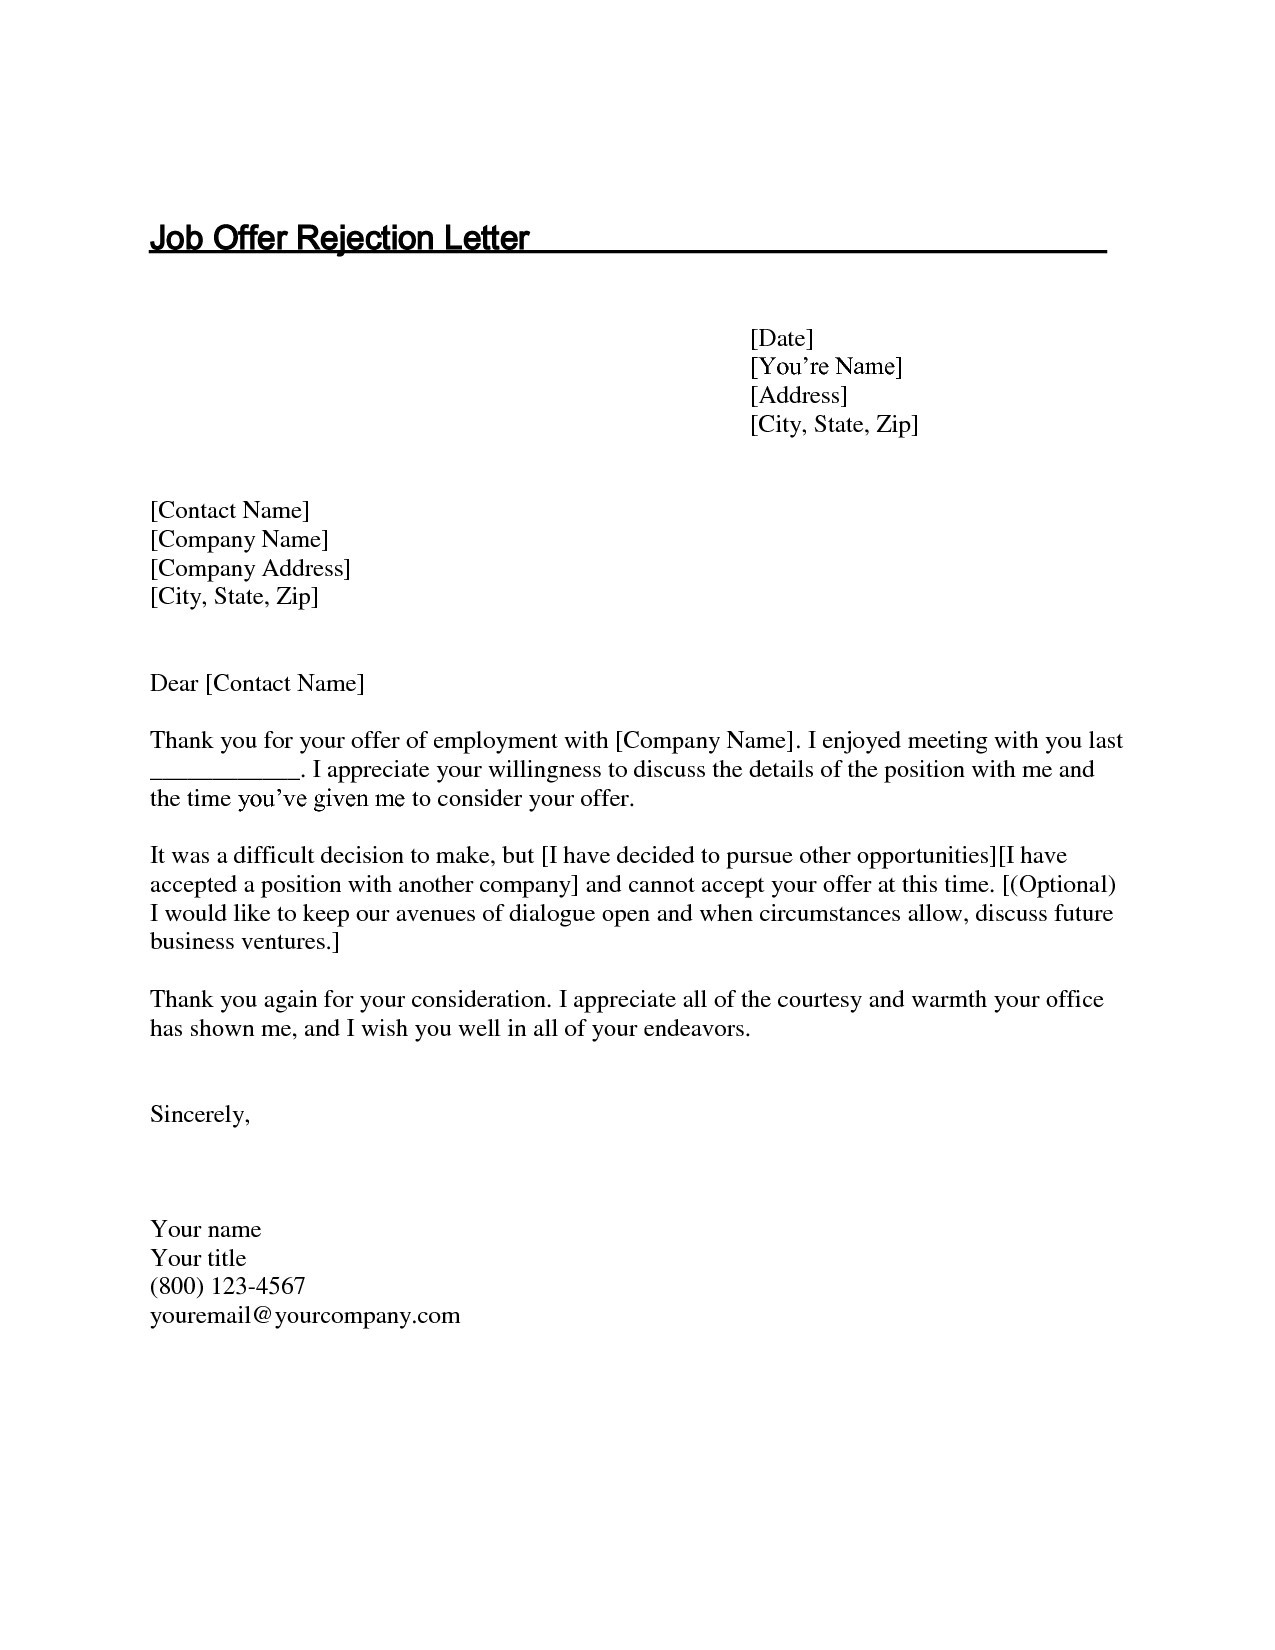 Employment Rejection Letter Template - Thank You Letter after Job Fer Decline Luxury New Rejection Letter